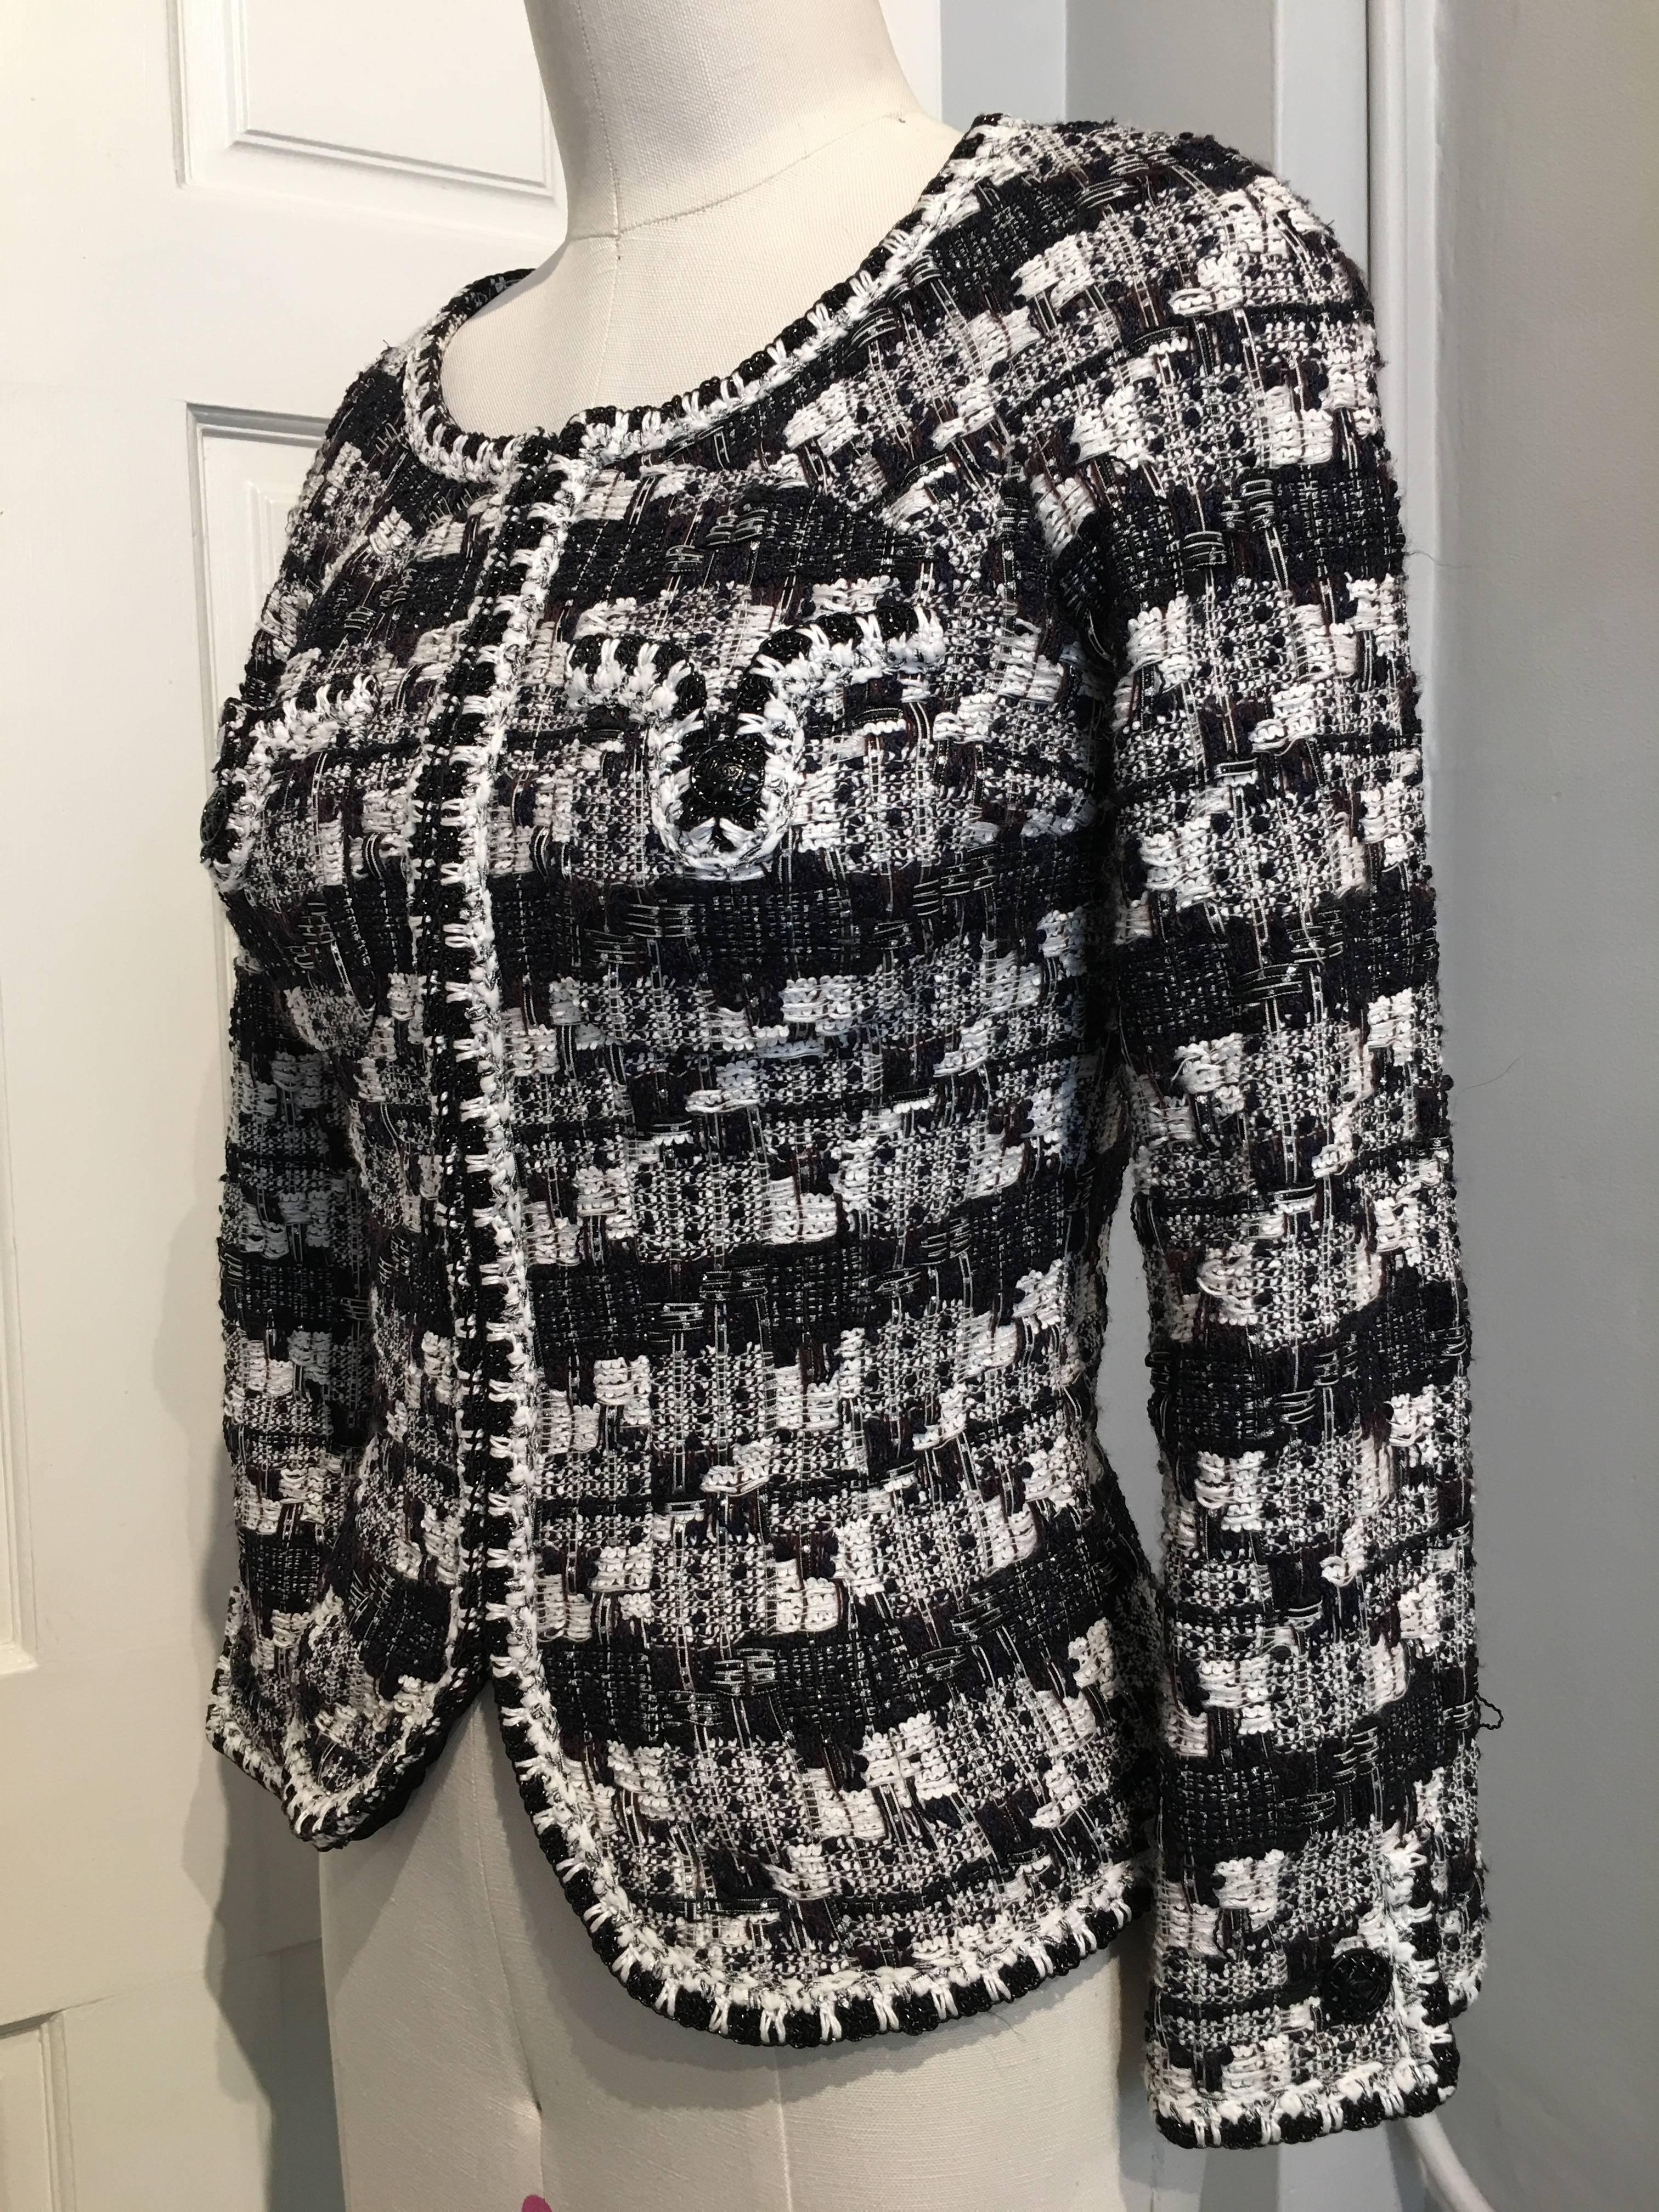 This Chanel jacket from the 2006 Cruise line is in a loose weave in white, navy, brown, silver and black threads. On each of the pockets and cuffs there is a black enameled button in a basket weave design. Small black glass beads alternate white